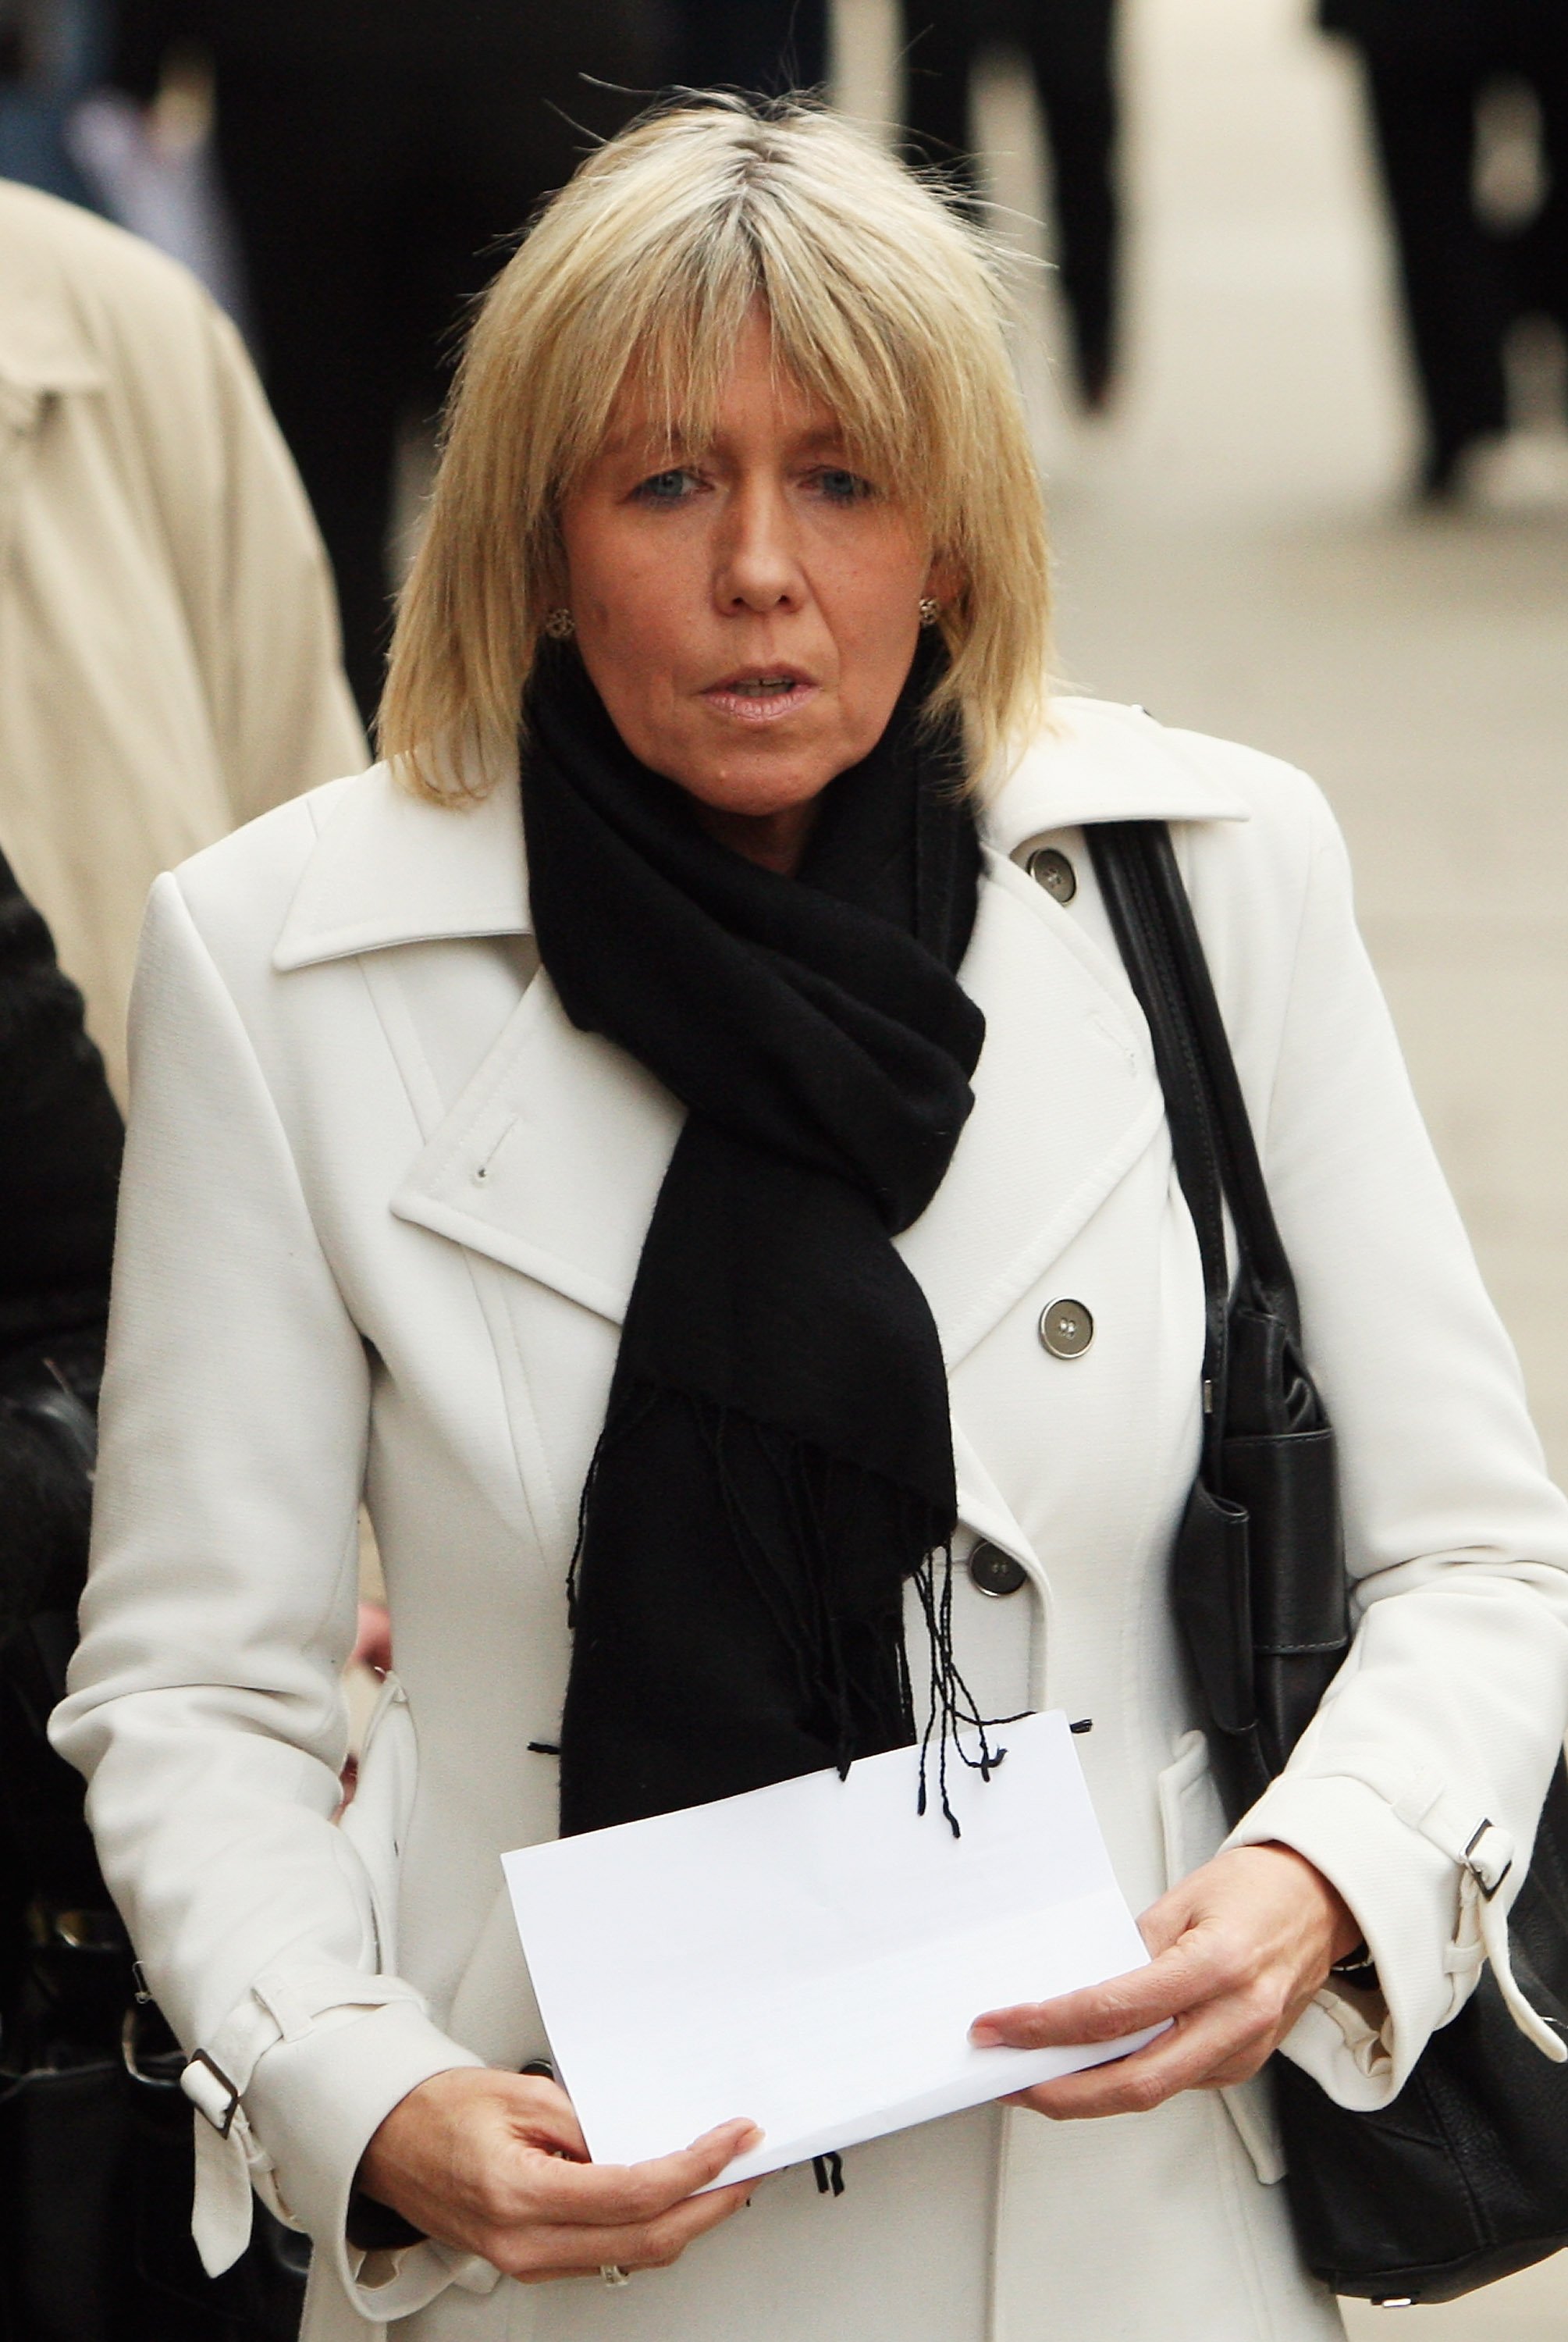 Robert Knox's mother, Sally Knox outside the Old Bailey on March 4, 2009 in London, England  | Photo: Getty Images